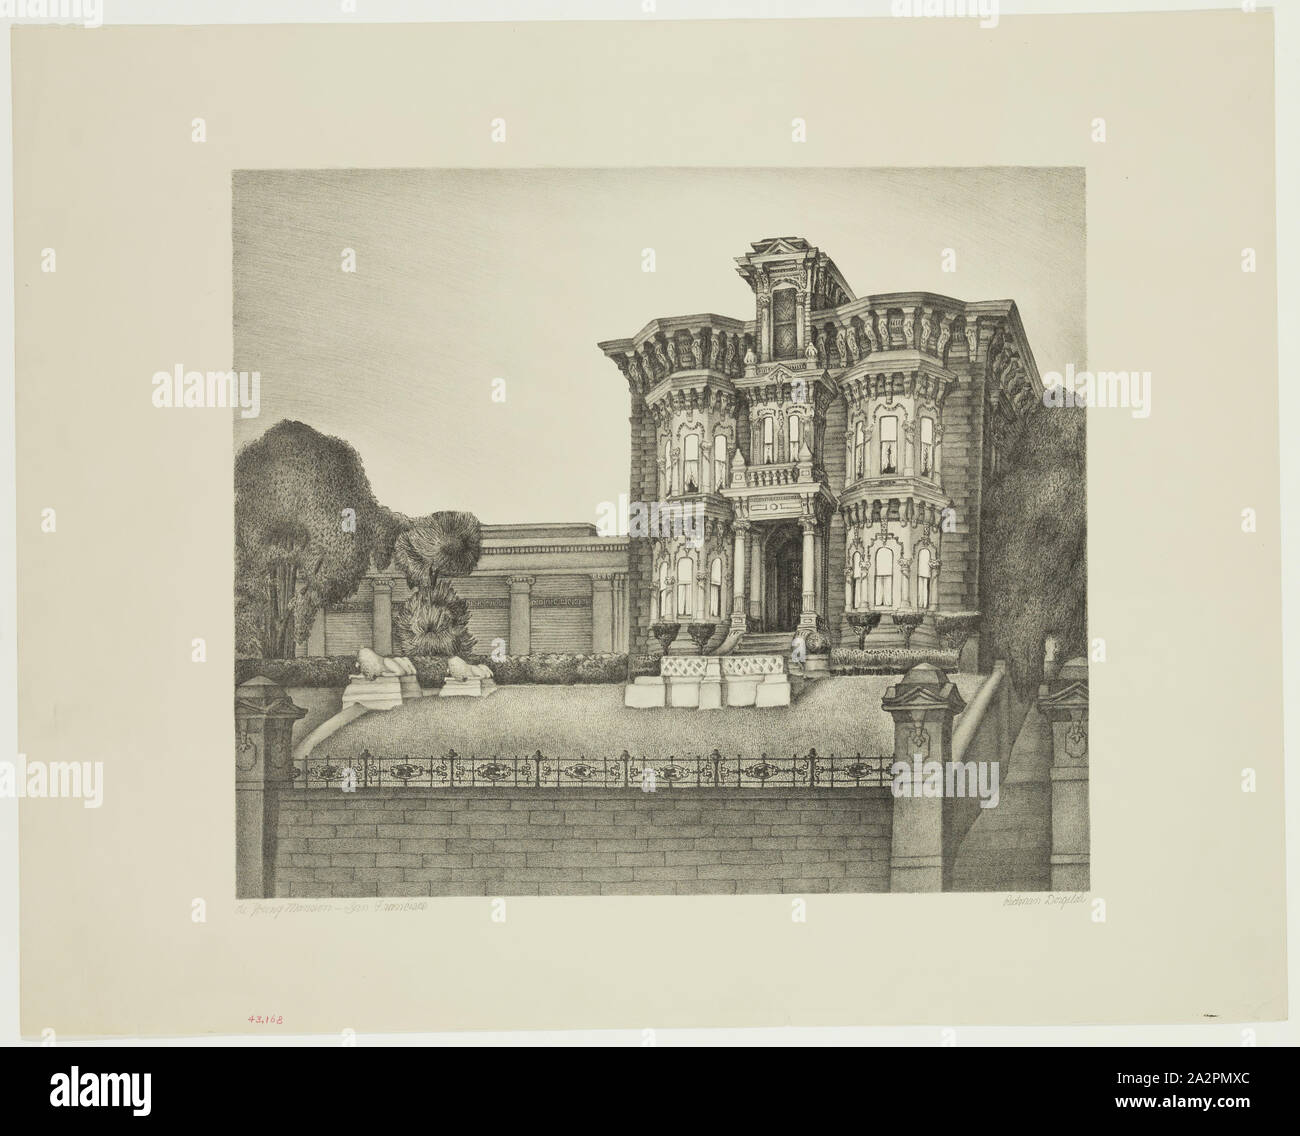 Marguerite Redman Dorgeloh, American, 1890-1944, De Young Mansion, San Francisco, between 1934 and 1943, lithograph printed in black ink on wove paper, Image: 11 1/2 × 13 1/2 inches (29.2 × 34.3 cm Stock Photo